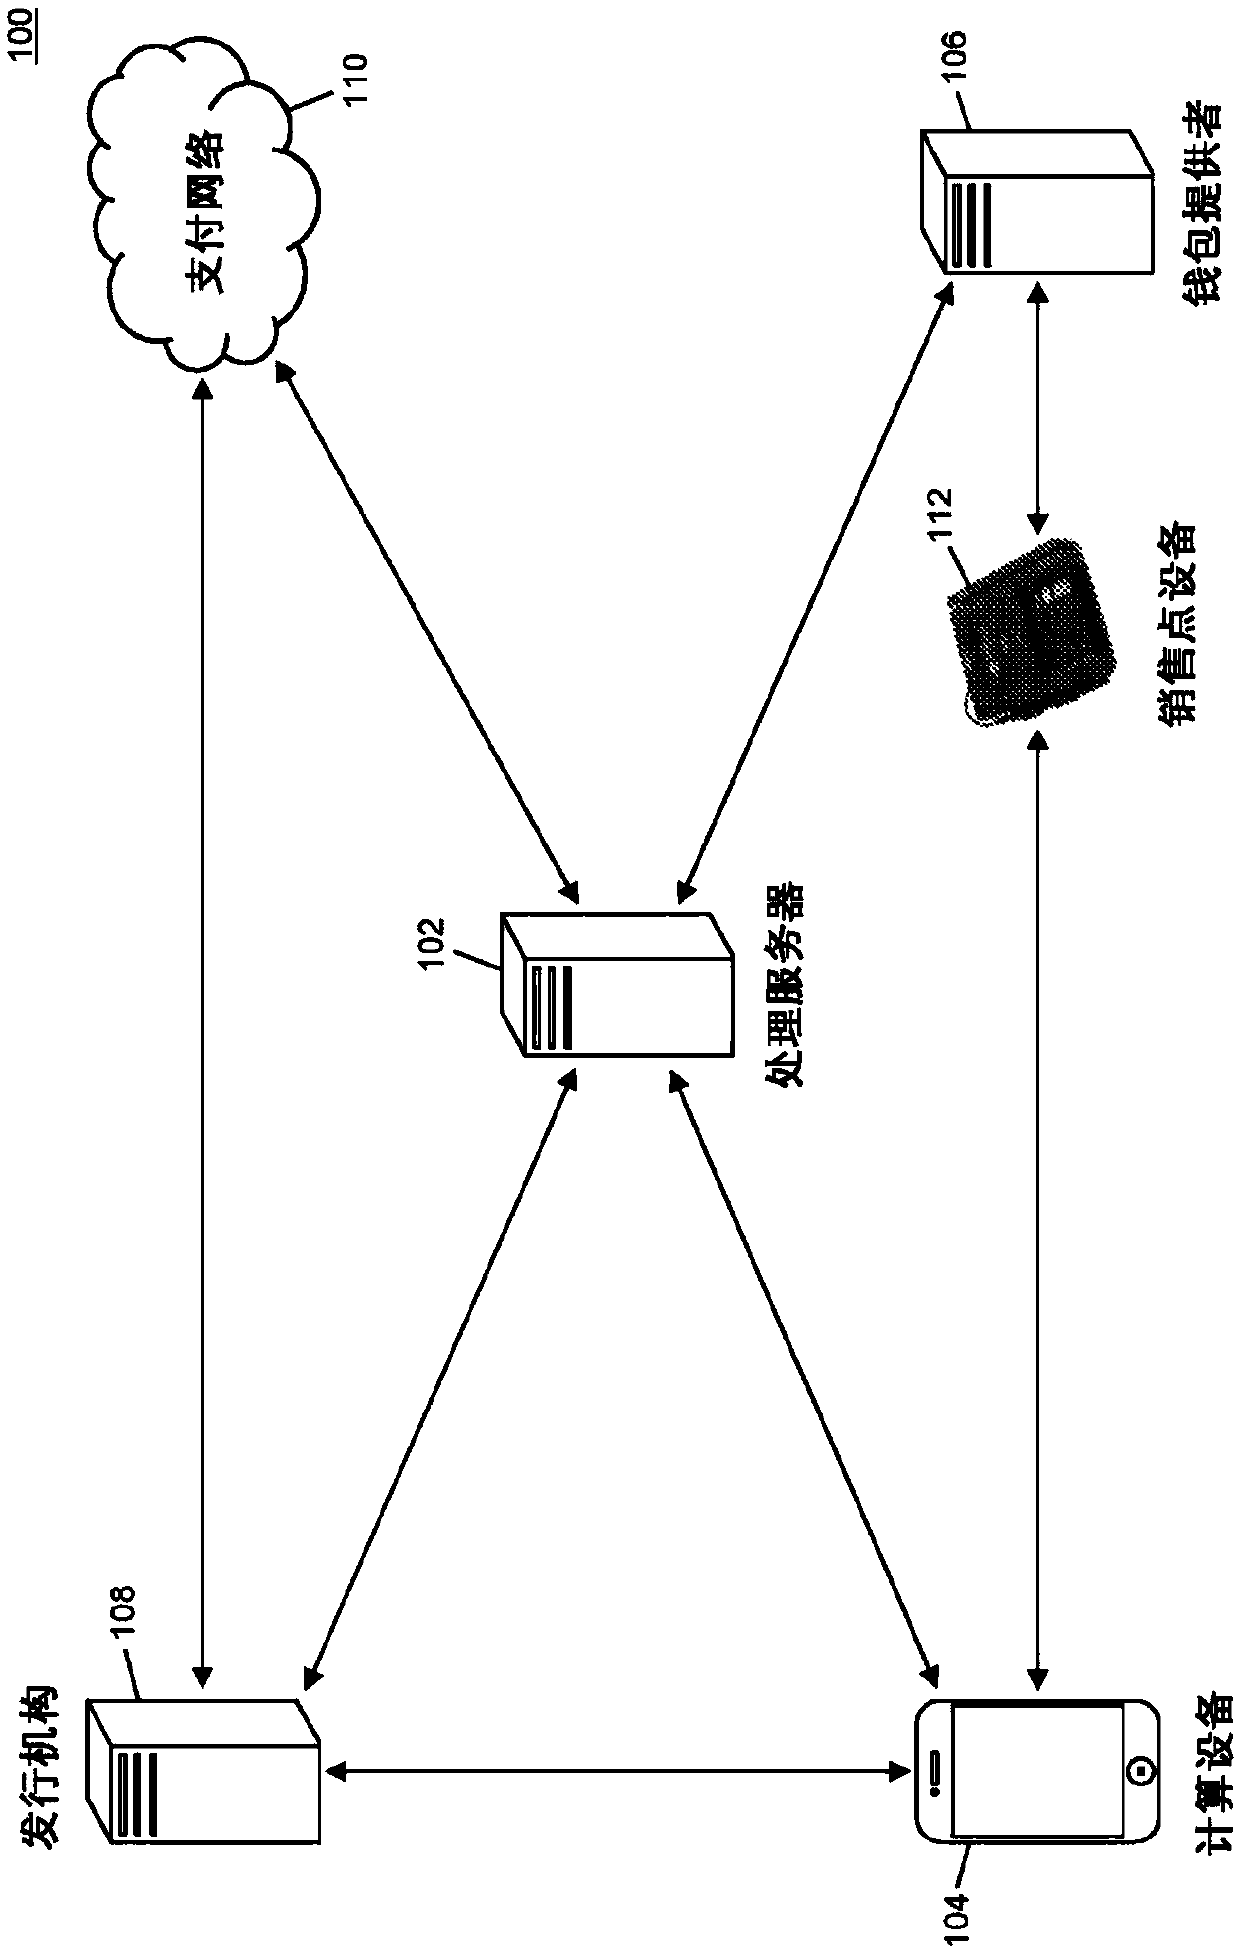 Method and system barcode-enabled payments